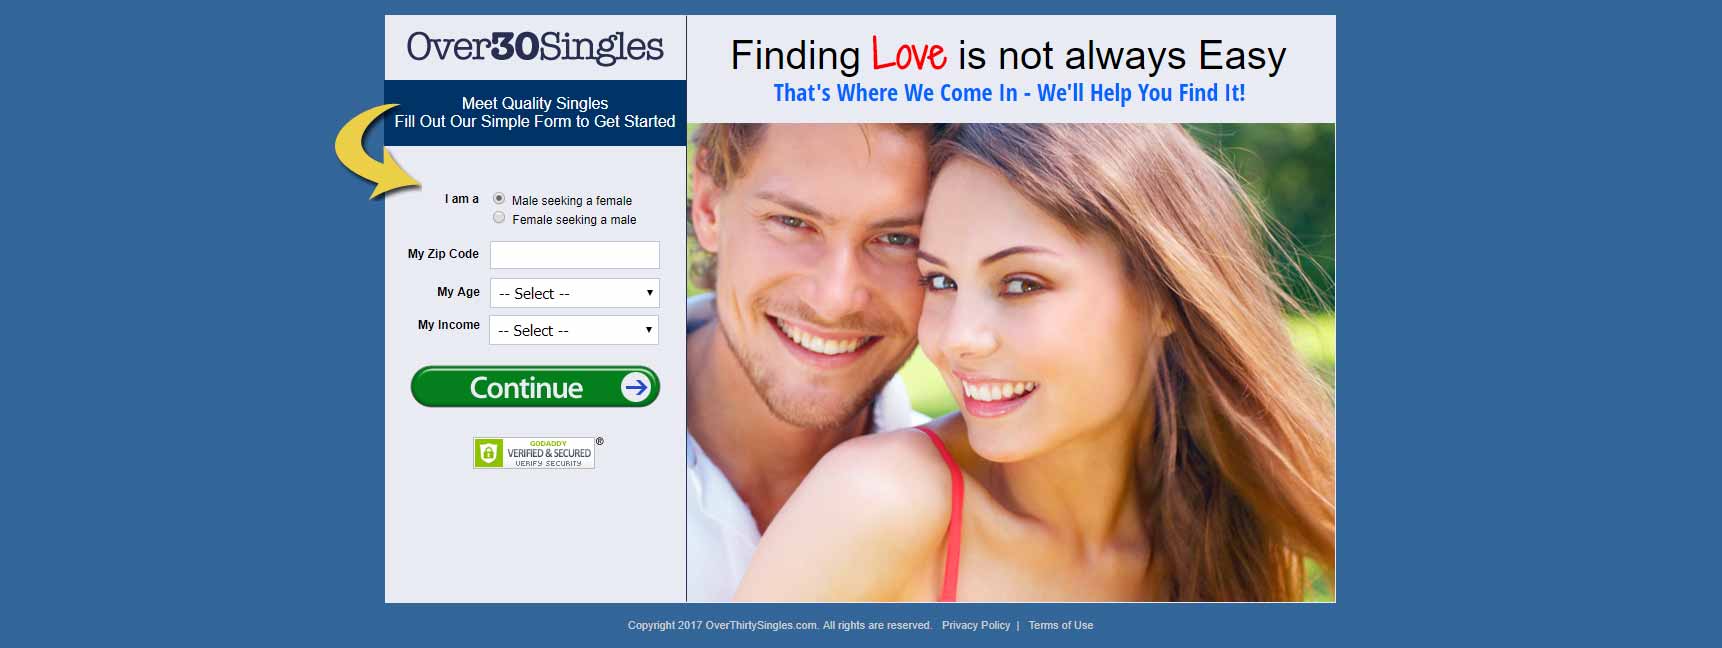 Over thirty singles website home page for international dating site review